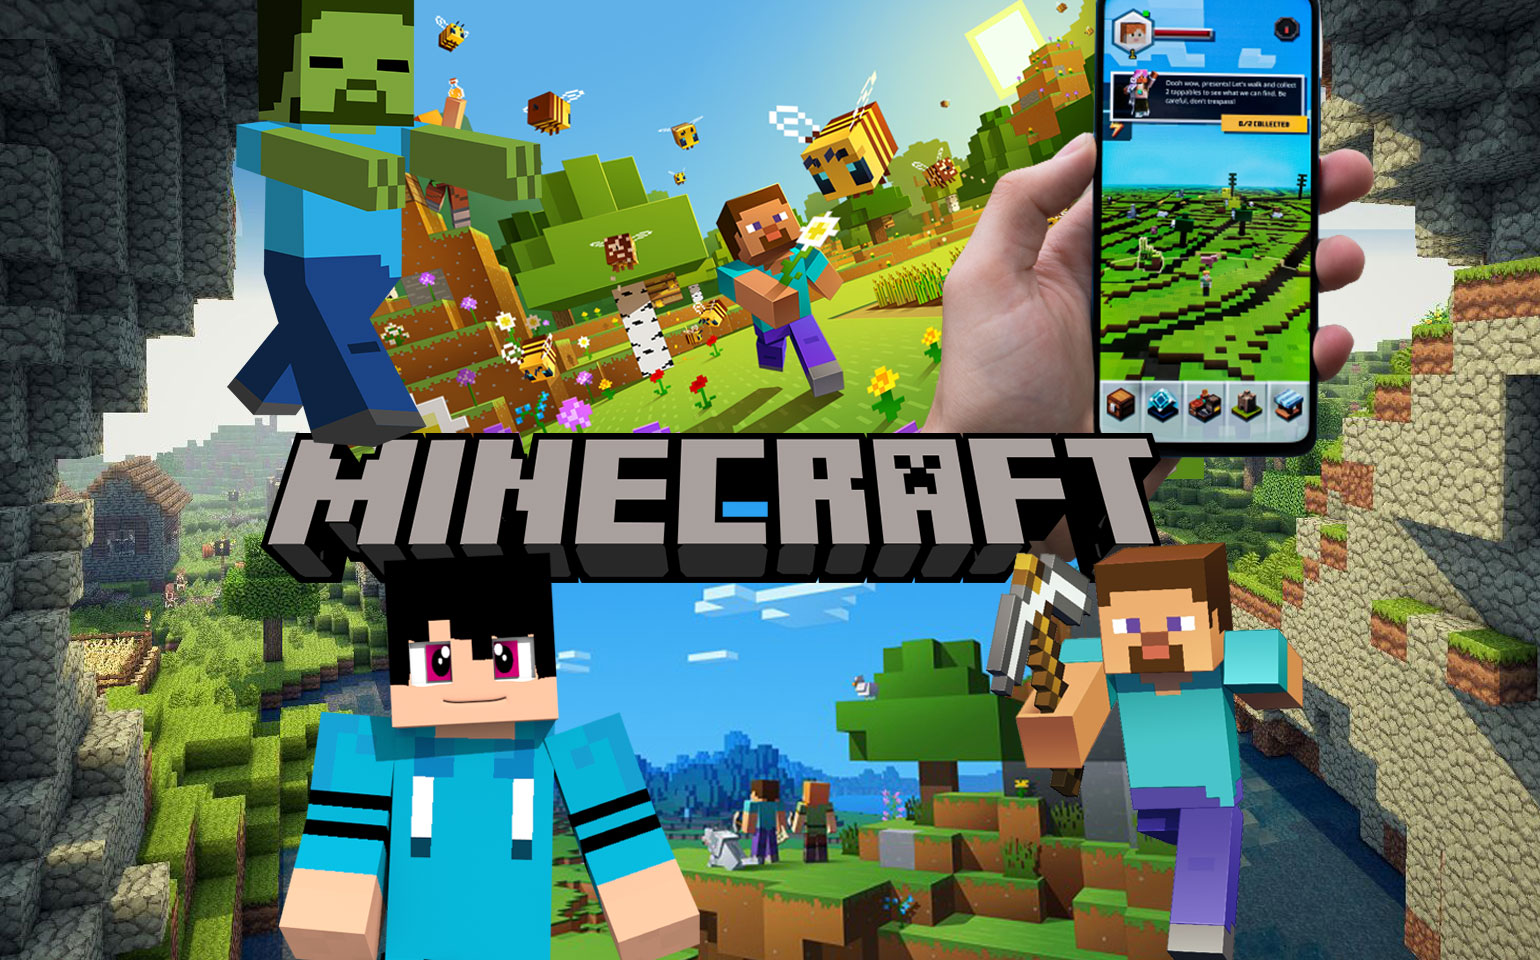 A promo screen of Minecraft is shown including some characters, a zombie and the mobile version of the game.